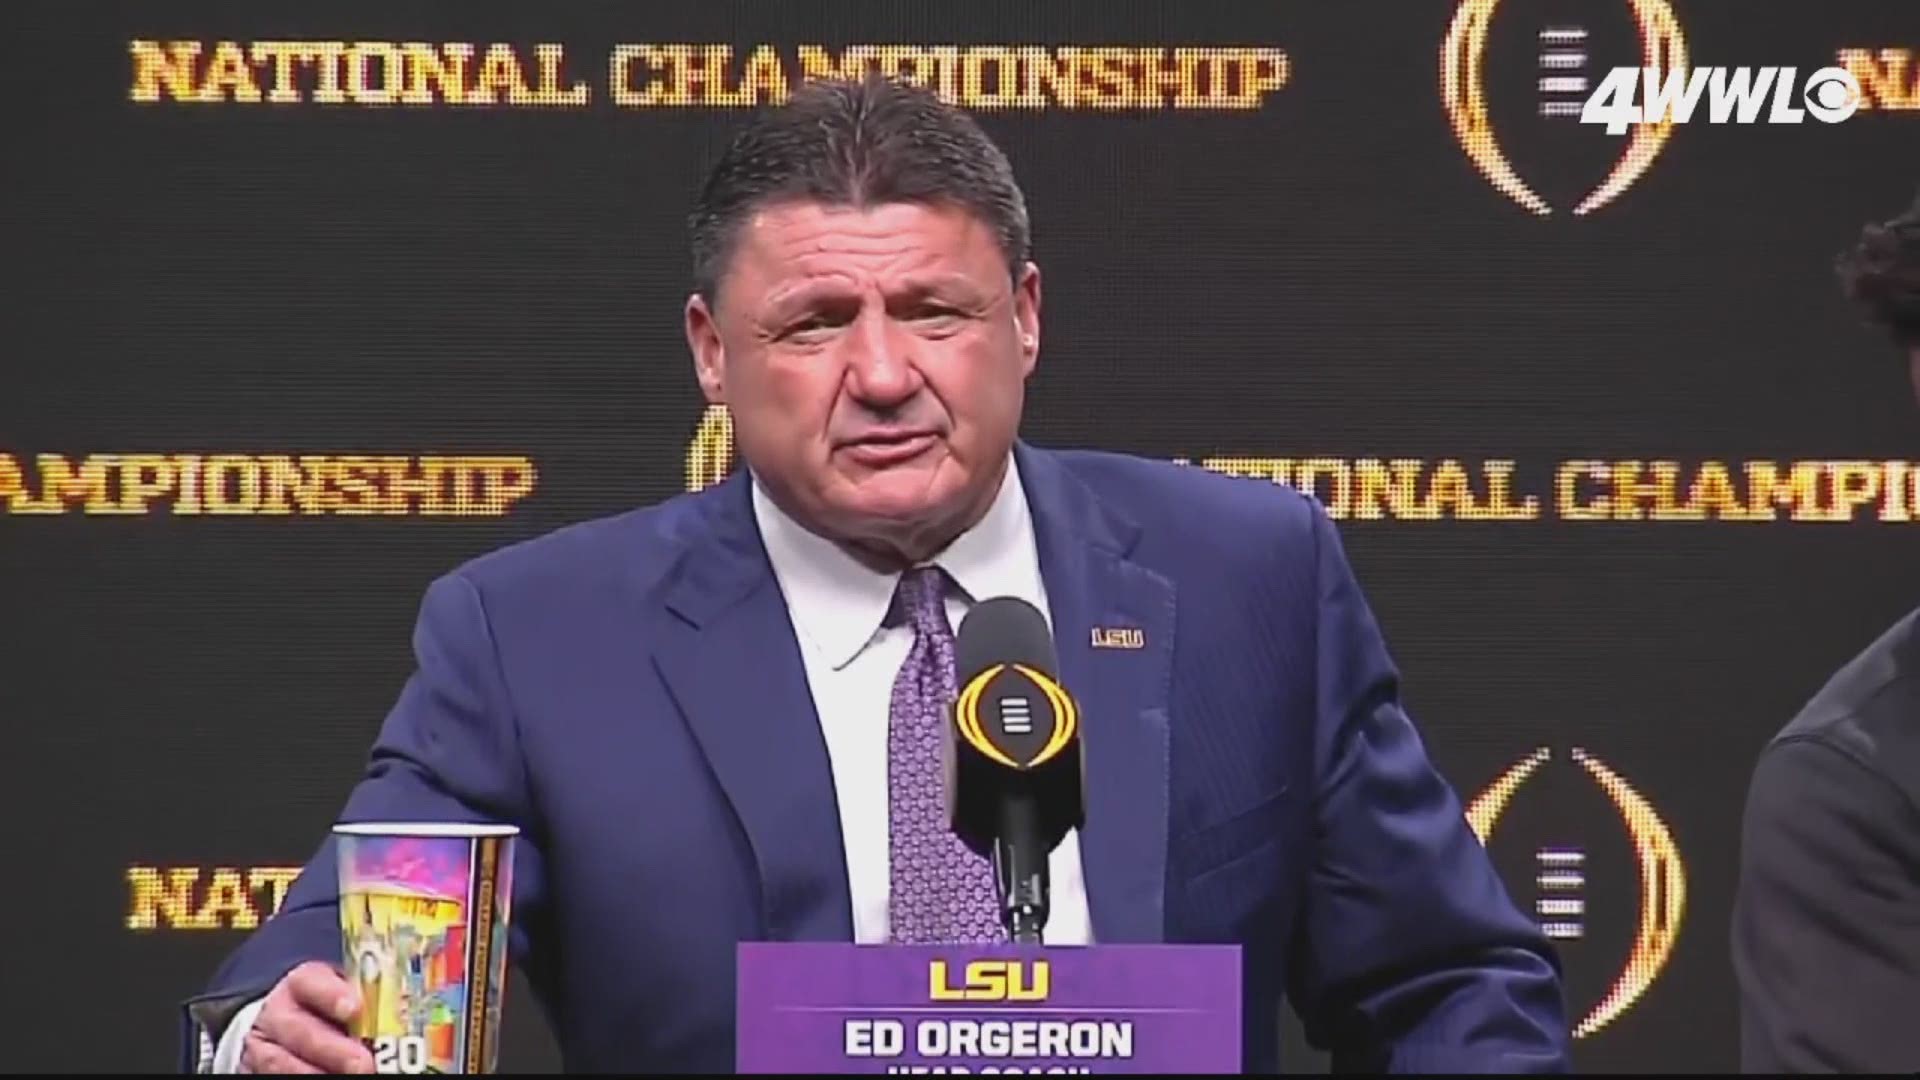 "Embrace LSU. I think that all three, the common factor is LSU. When you come to LSU, that’s the expectation. I embraced it," Orgeron said.